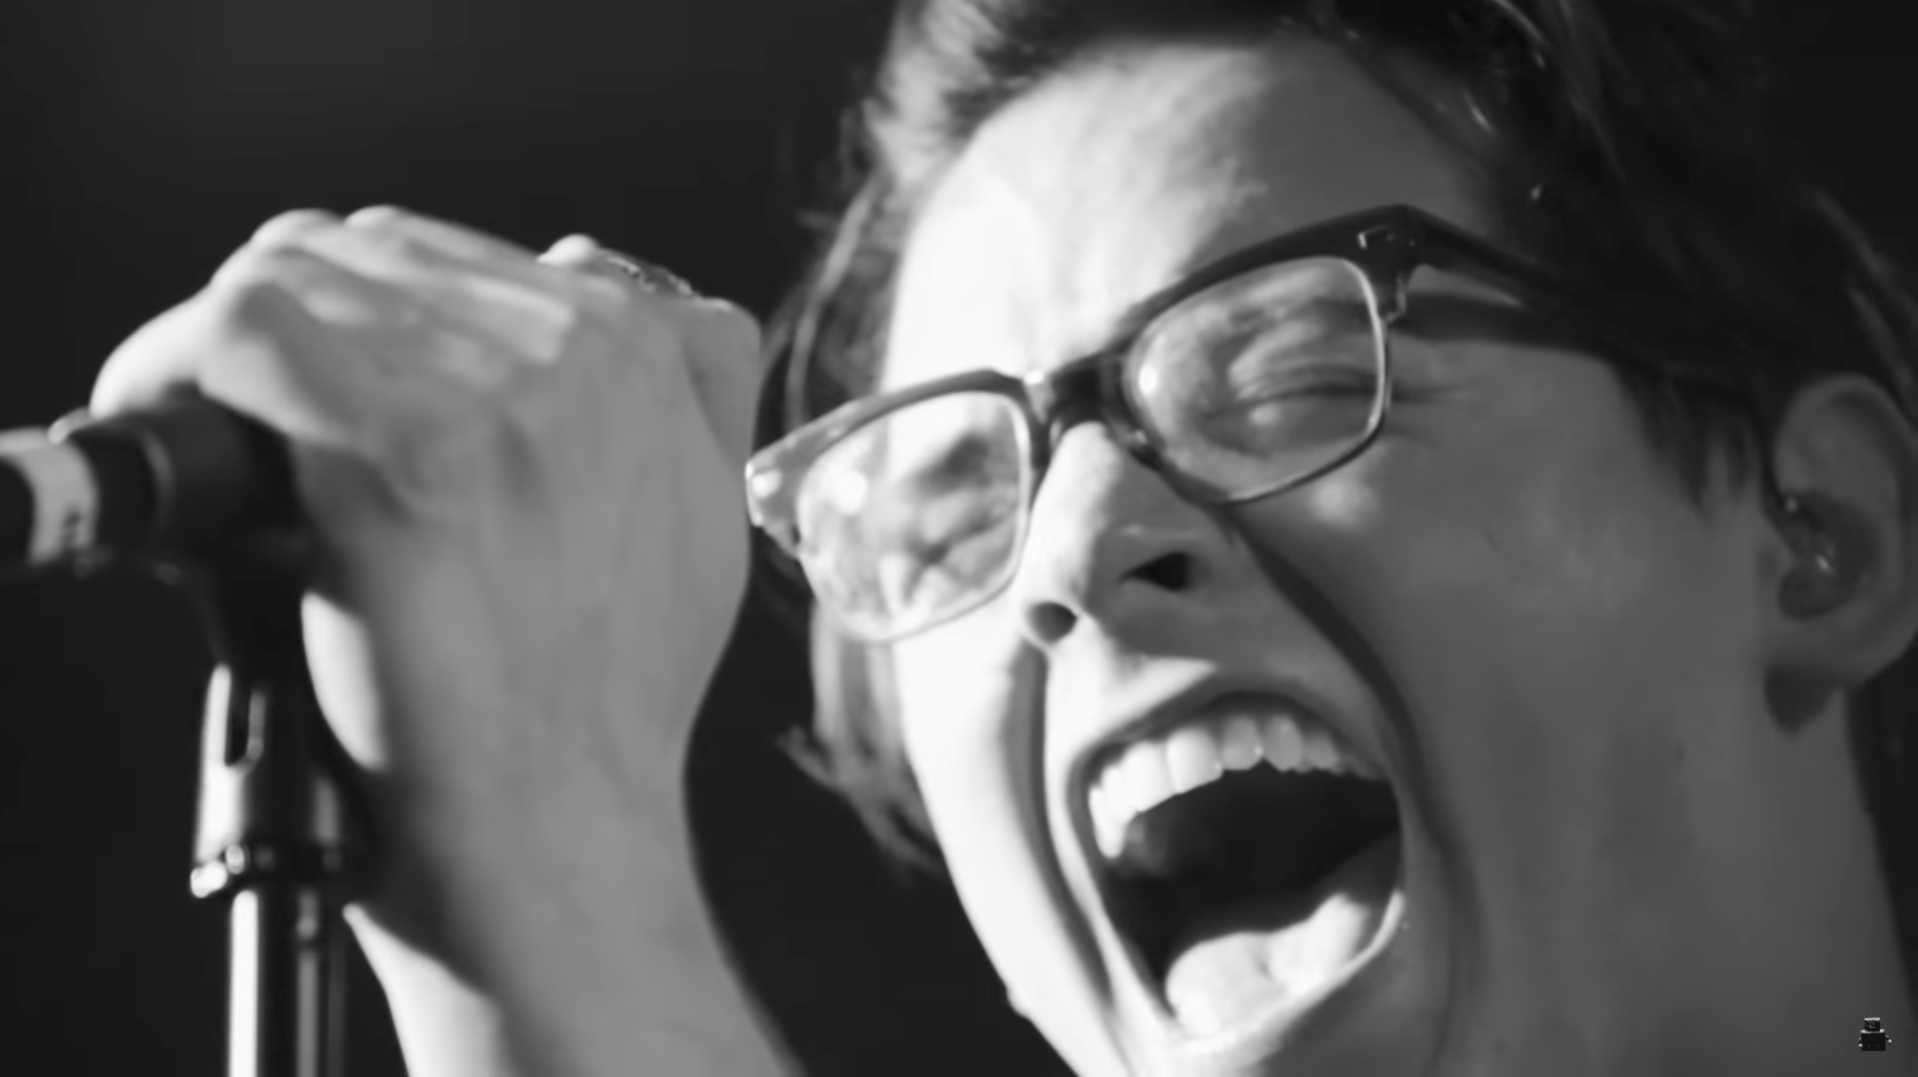 A still from 'Favorite Liar' by The Wrecks. Photo by: The Wrecks / YouTube